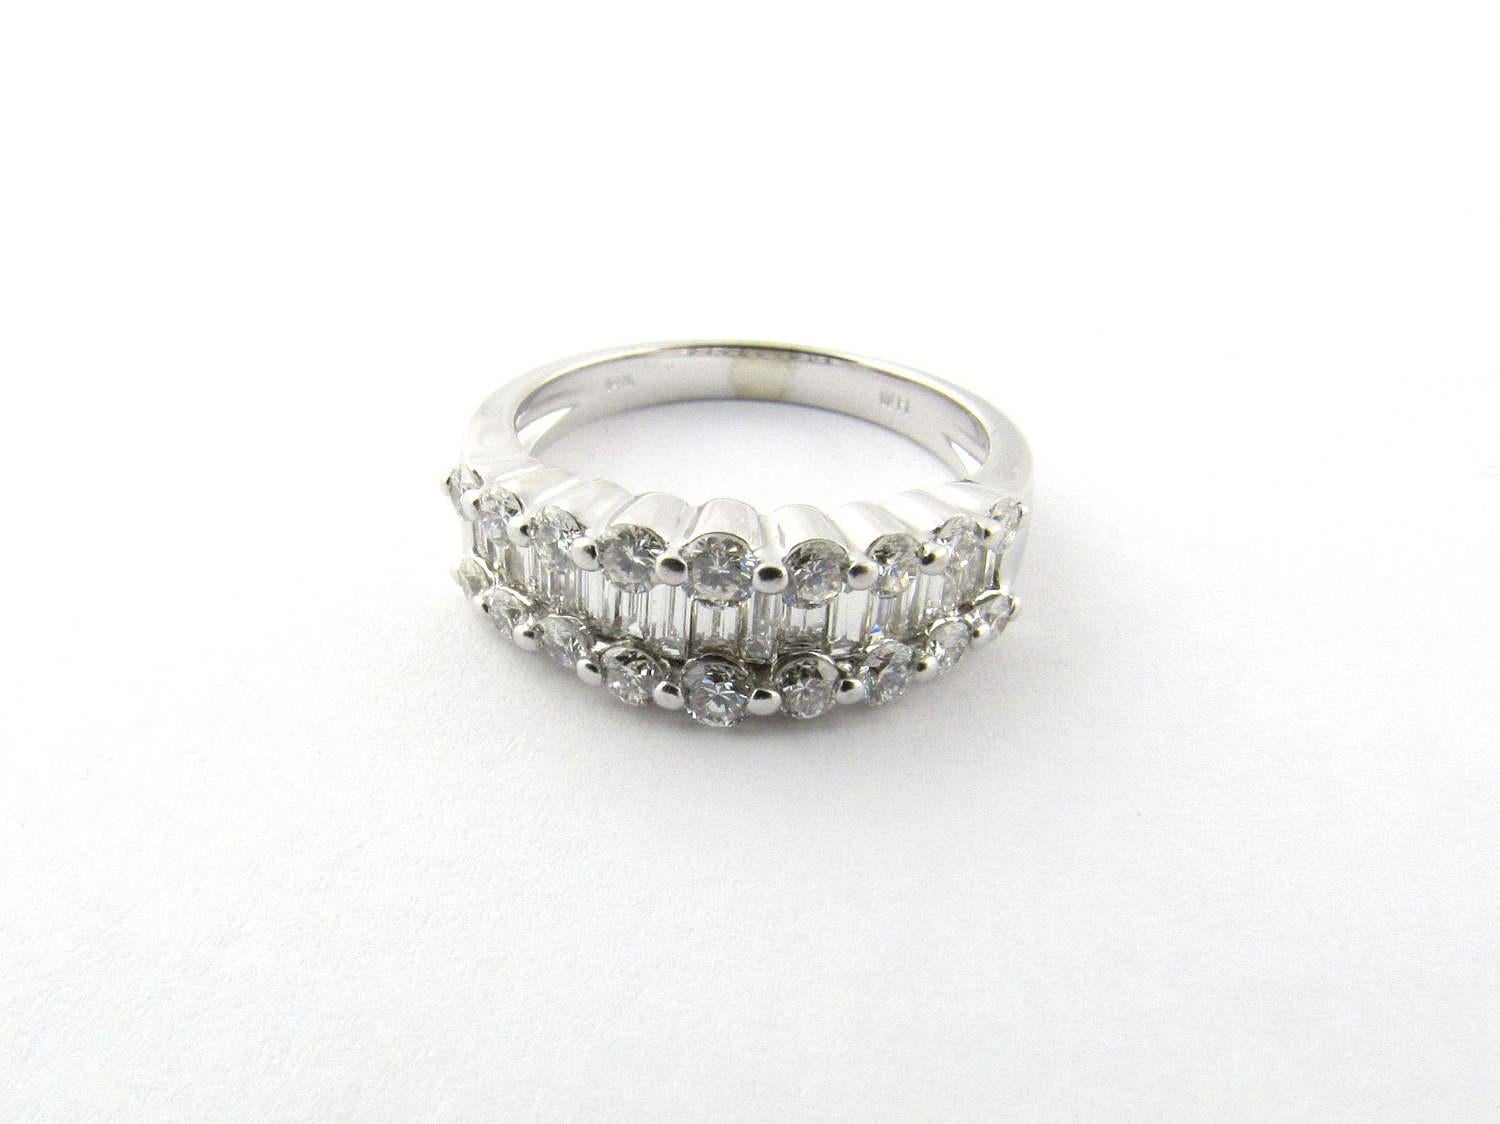 Vintage 14 Karat White Gold Diamond Wedding Band Size 6.25

This stunning ring features one row of 17 baguette diamonds weighing approximately .05 ct. each. and two rows of nine round cut diamonds: 

2 x .06 ct. 

4 x .05 ct. 

4 x .04 ct. 

4 x .03